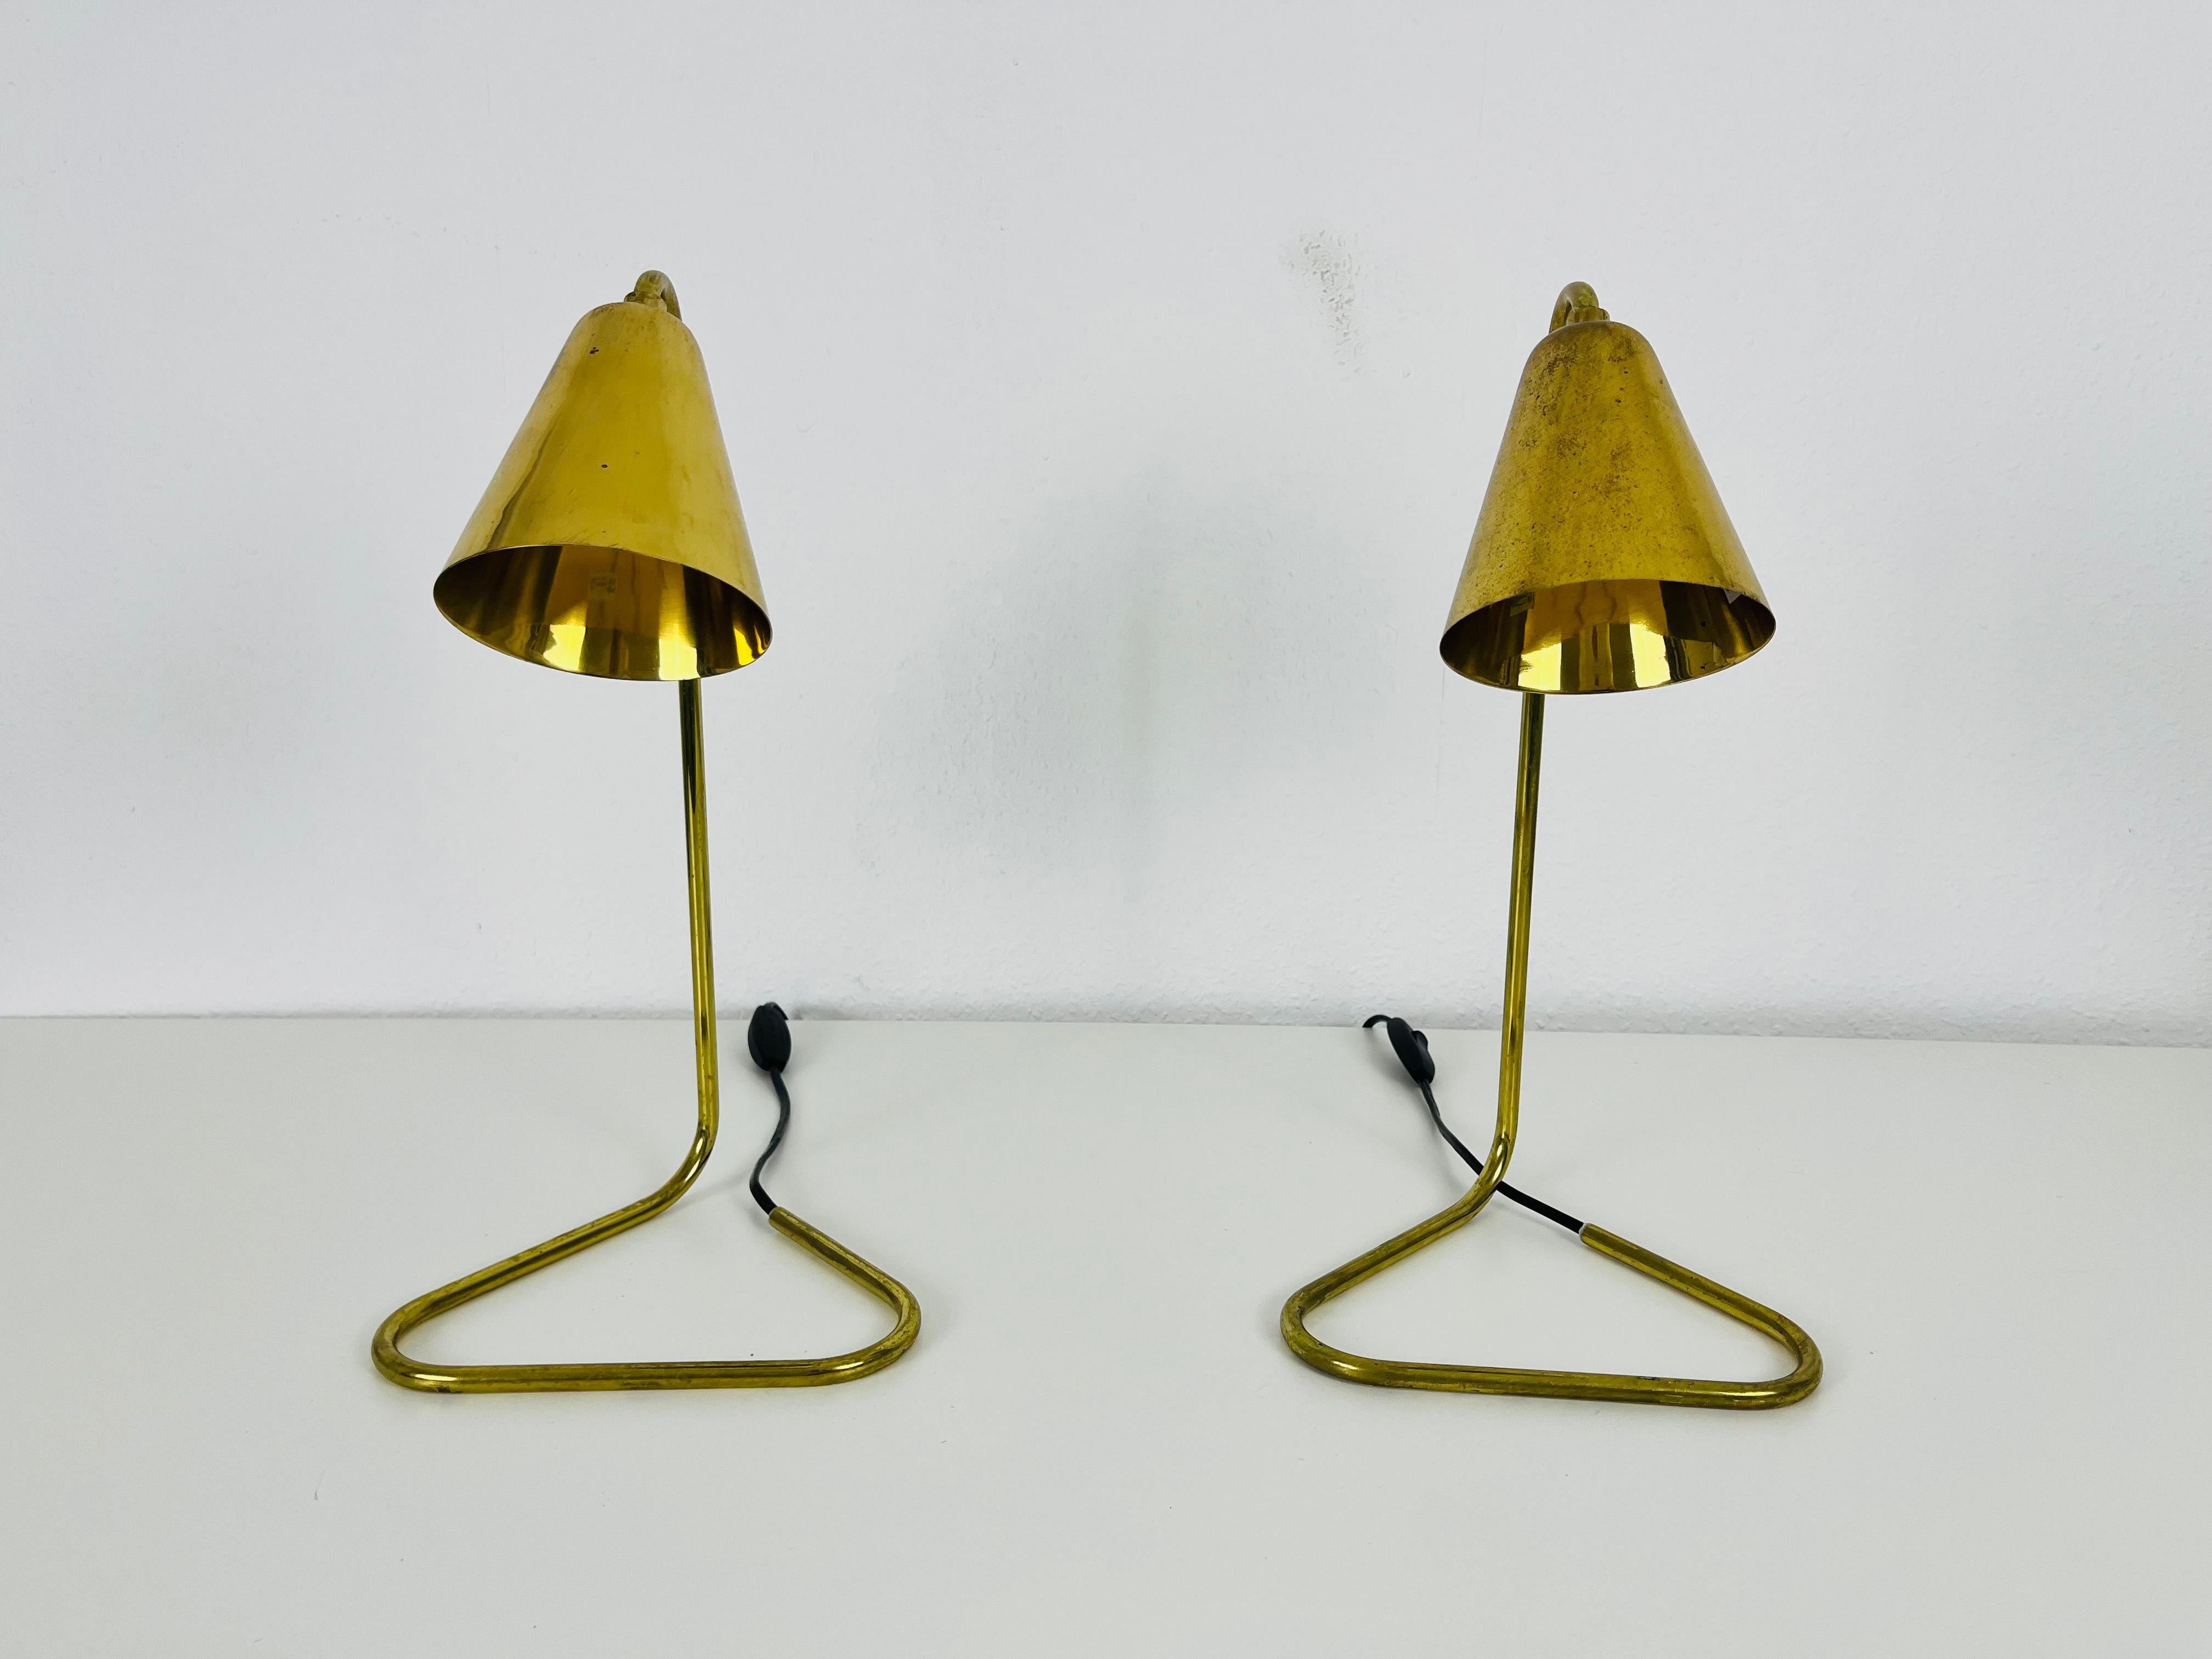 A beautiful pair of mid-century table lamps made in Italy in the 1960s. It is fascinating with its beautiful tripod base. The table lamps are made of polished brass.

Good vintage condition. The lightings require E14 light bulbs. Works with both